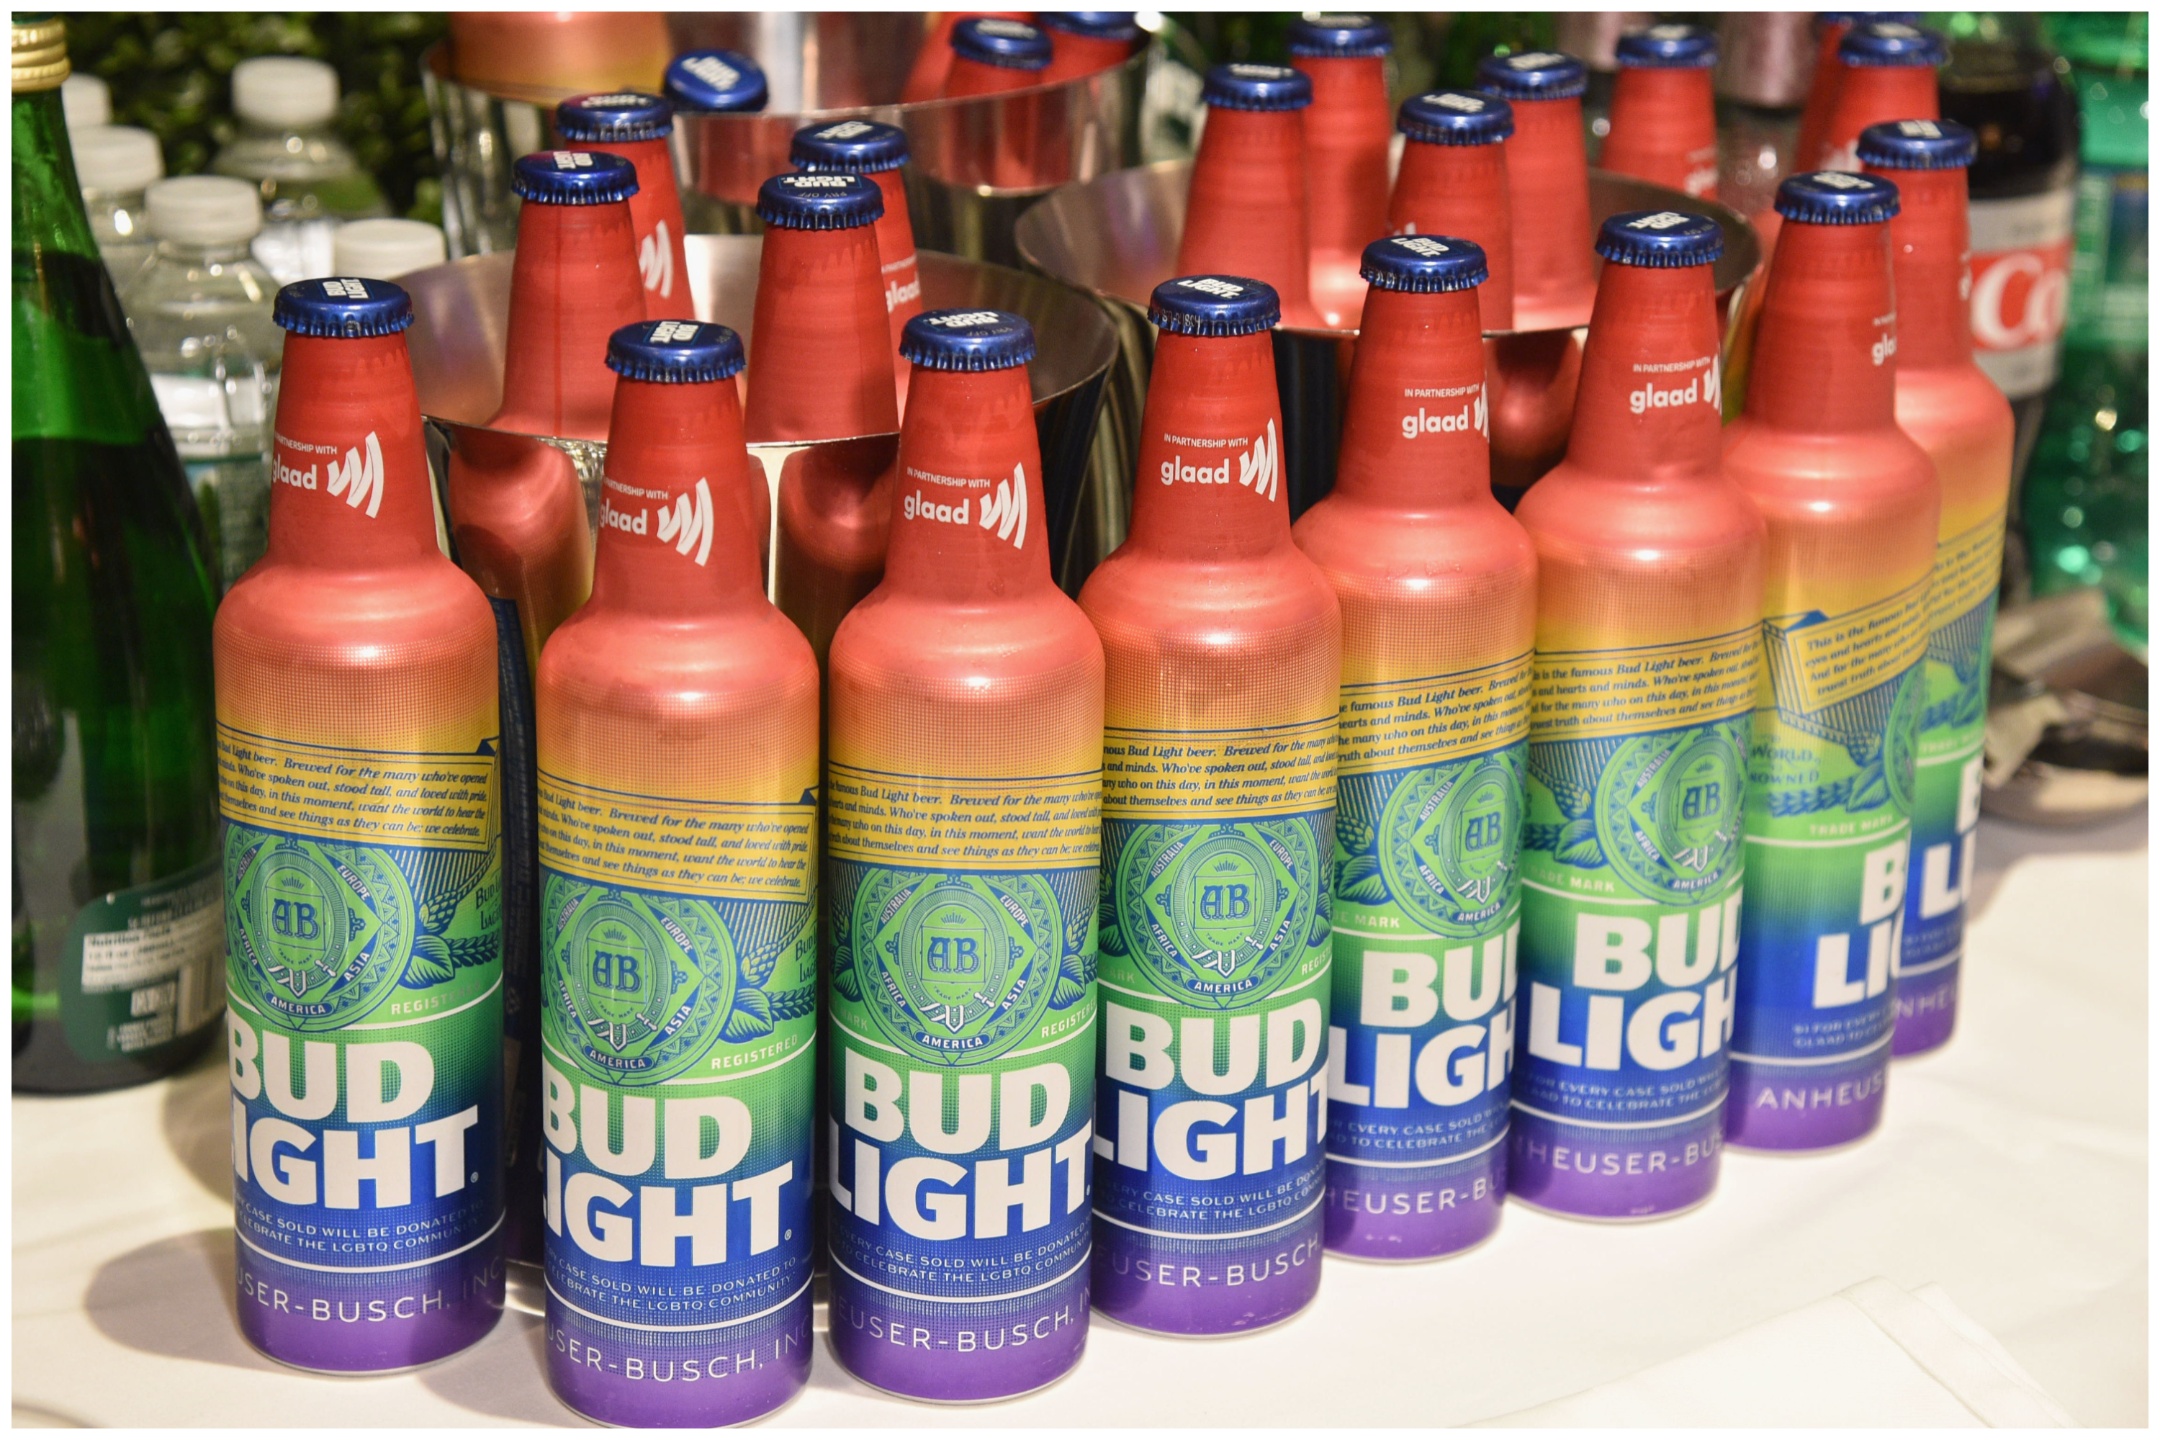 Bud Light’s battle “already been lost” ahead of July 4: Former executive